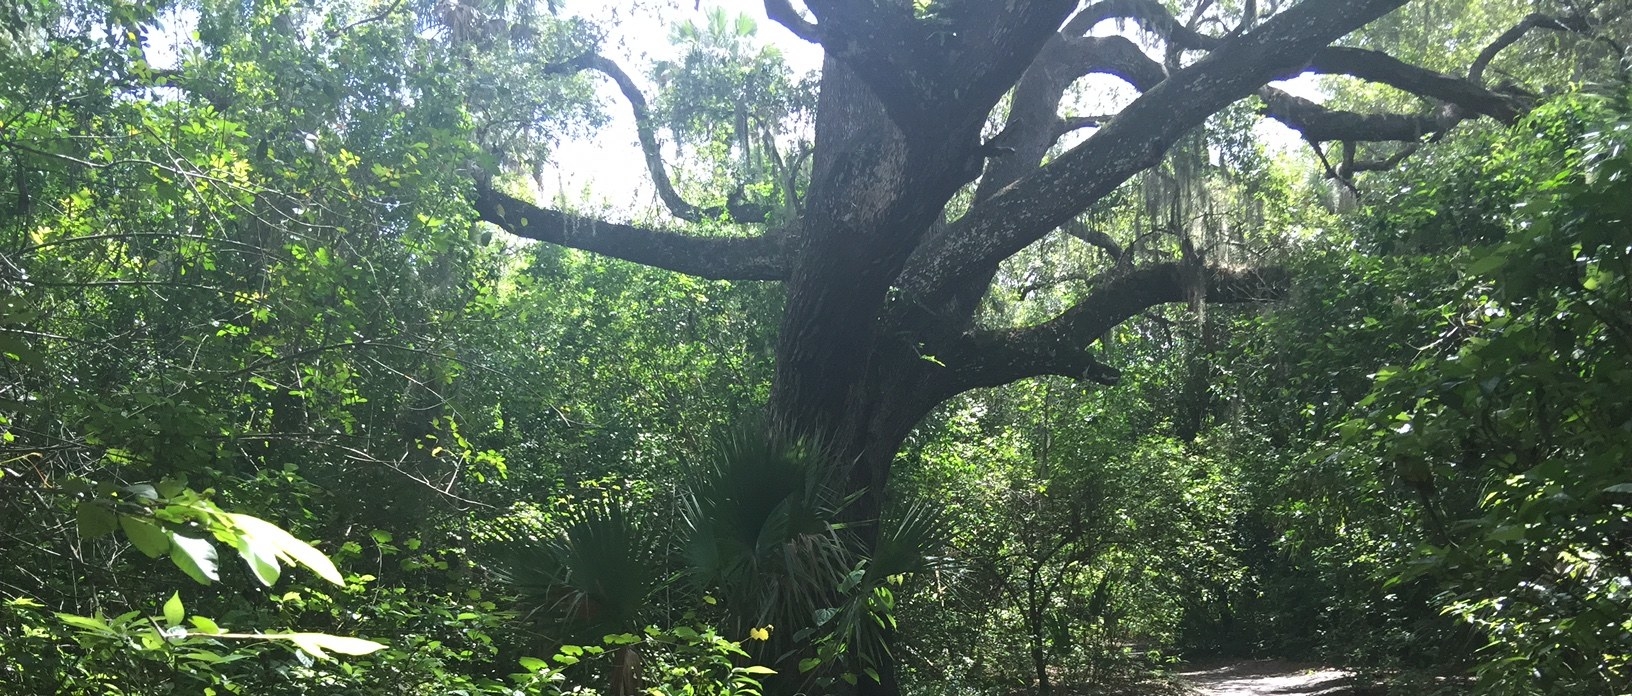 A large oak tree with palmetto leaves around it